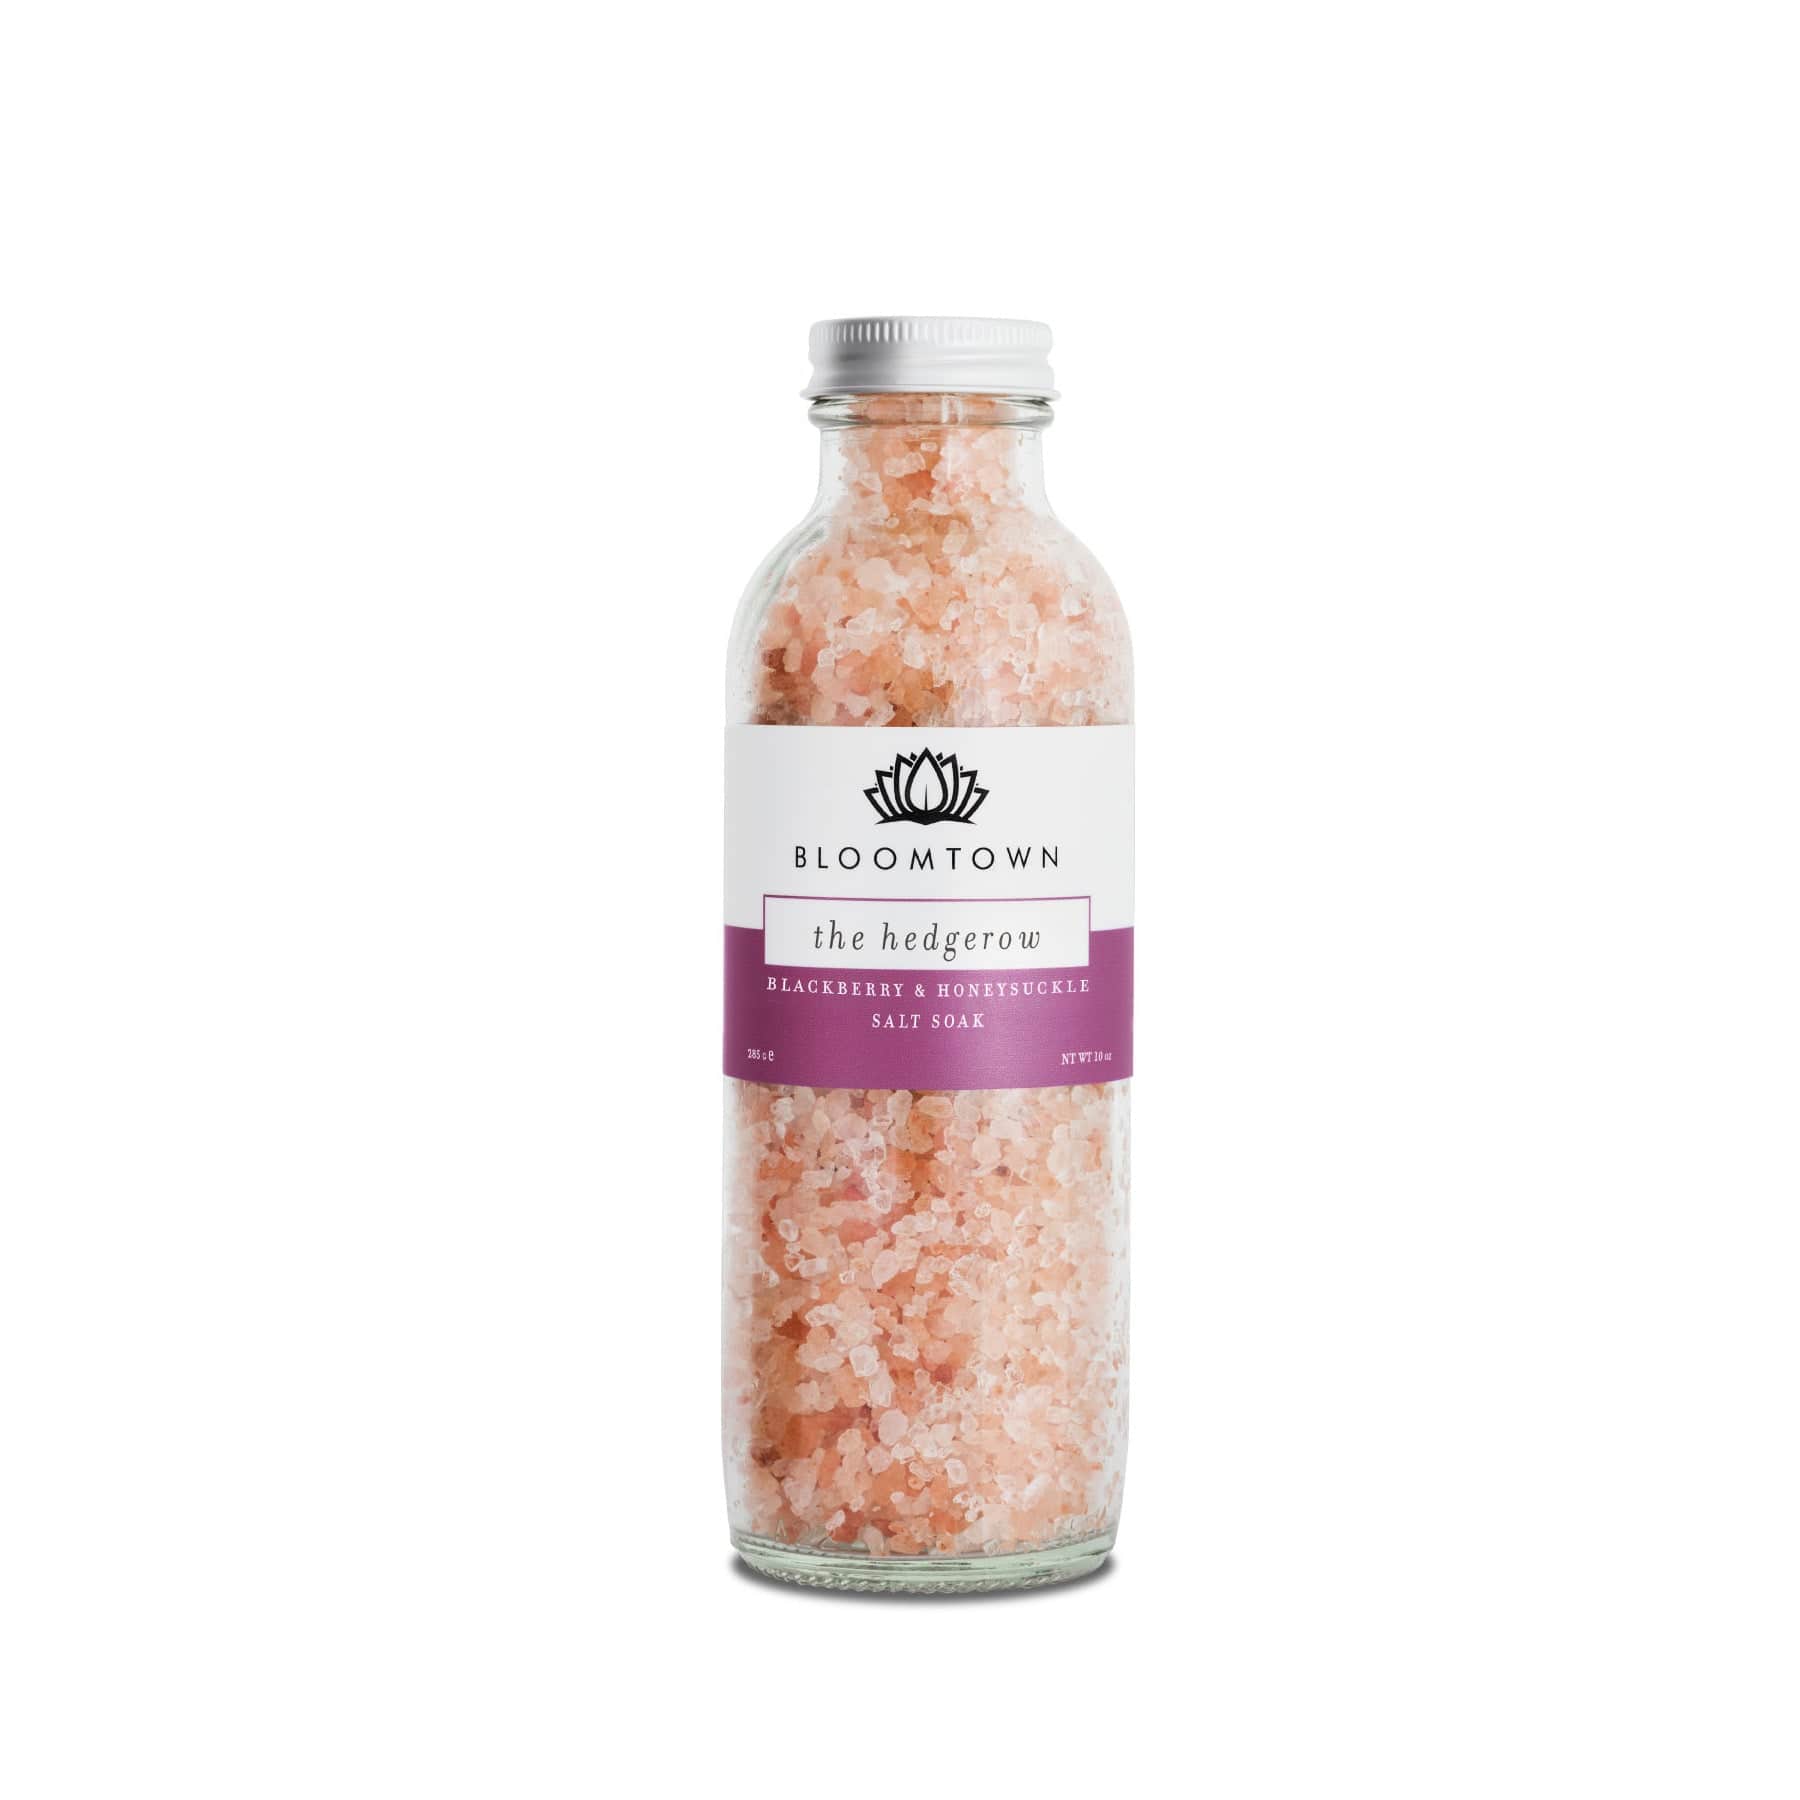 Bloomtown The Hedgerow Bath Salts in Glass Bottle, Blackberry and Honeysuckle Salt Soak, Natural Skincare, Vegan Bath Product, Pink Coarse Bath Salts, Personal Care Items, Wellness and Relaxation Products, White Background